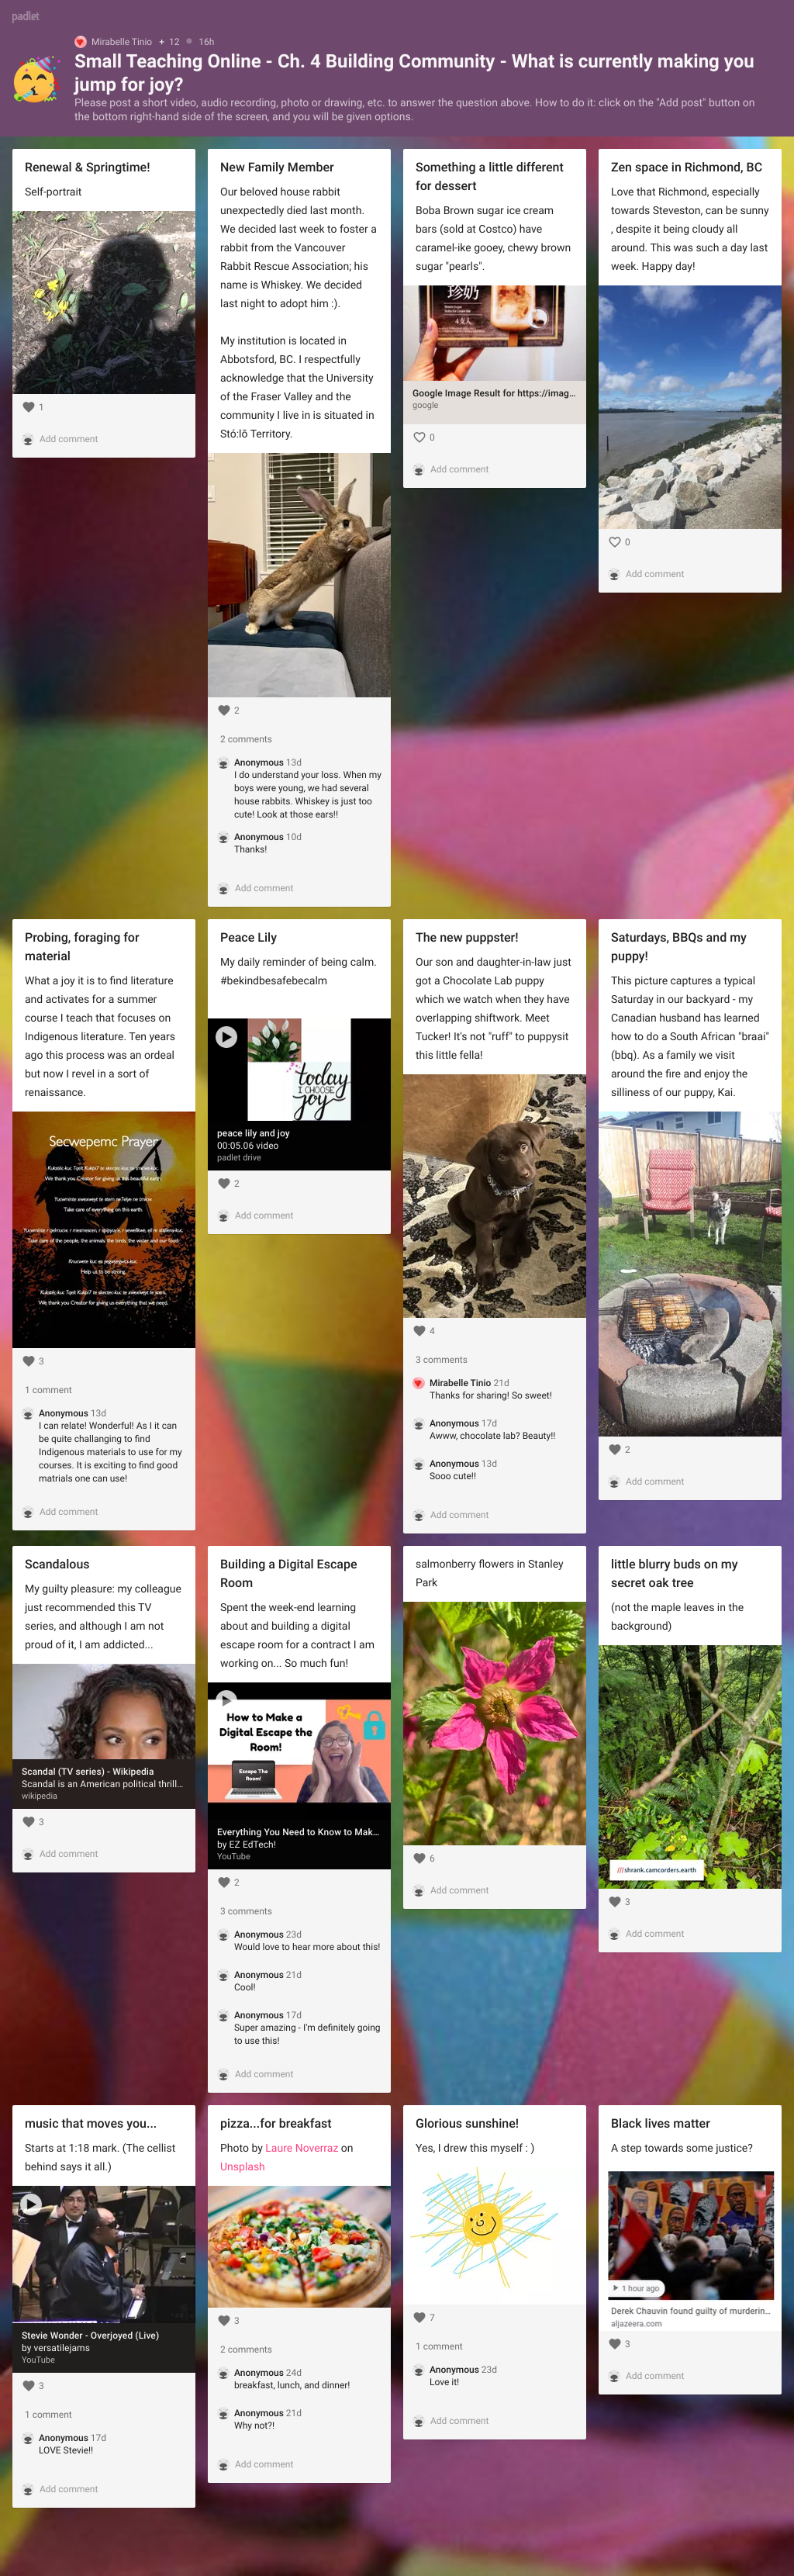 Padlet - what is making the book club jump for joy